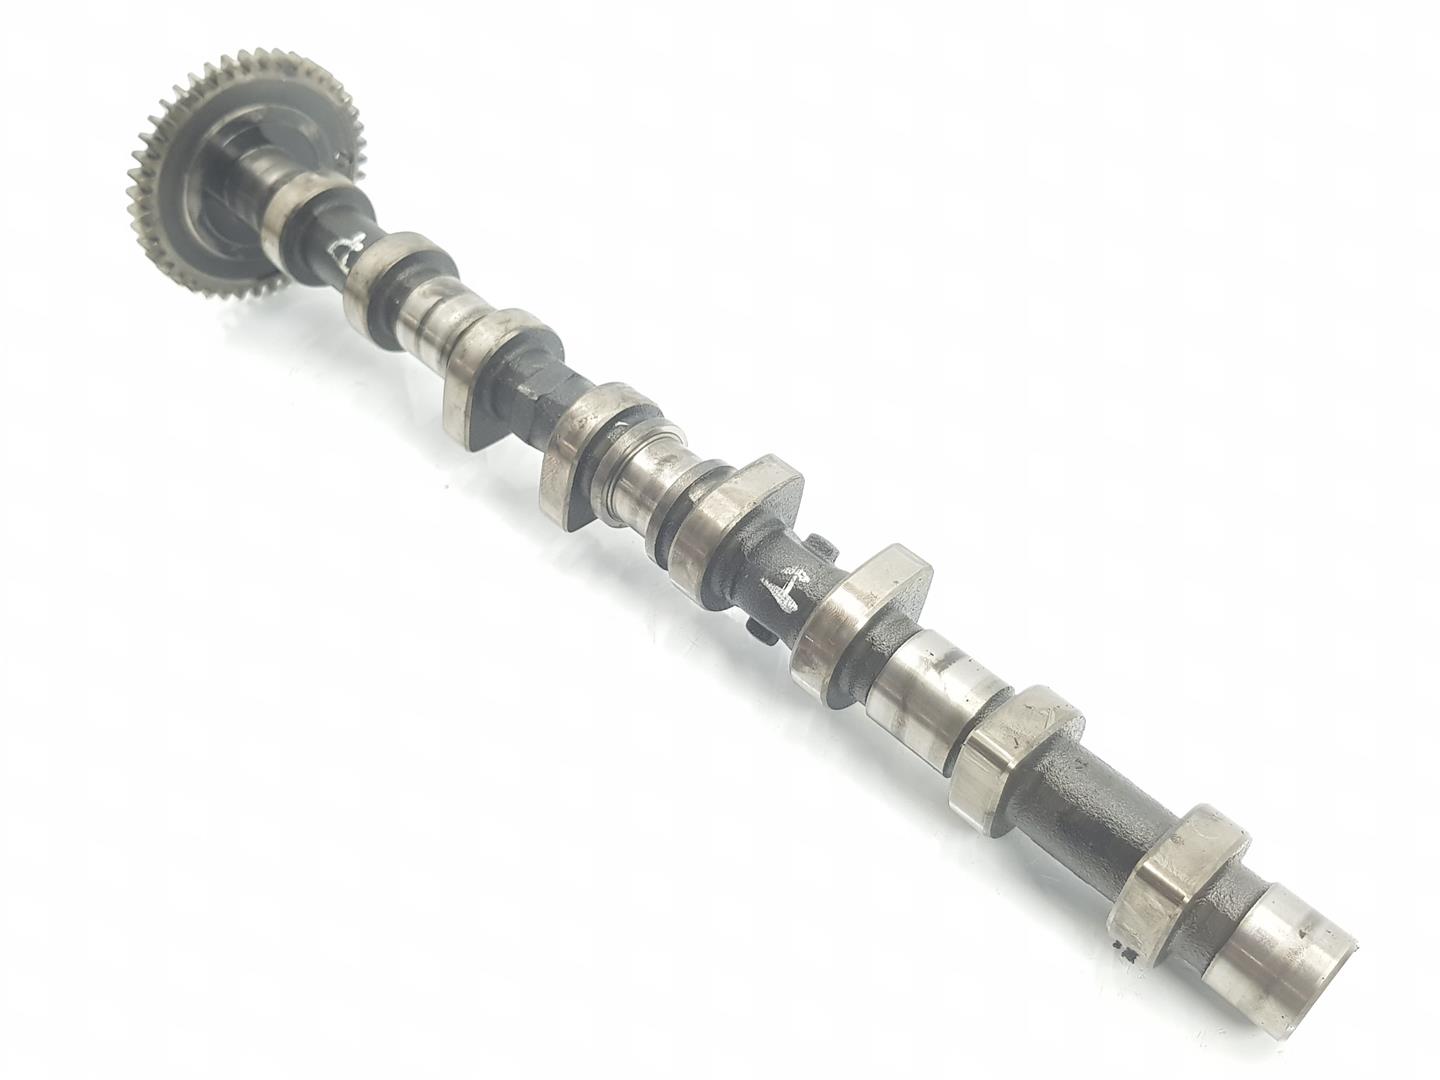 MERCEDES-BENZ Vito W638 (1996-2003) Exhaust Camshaft A6110502201, A6110500801, ADMISION 19910244